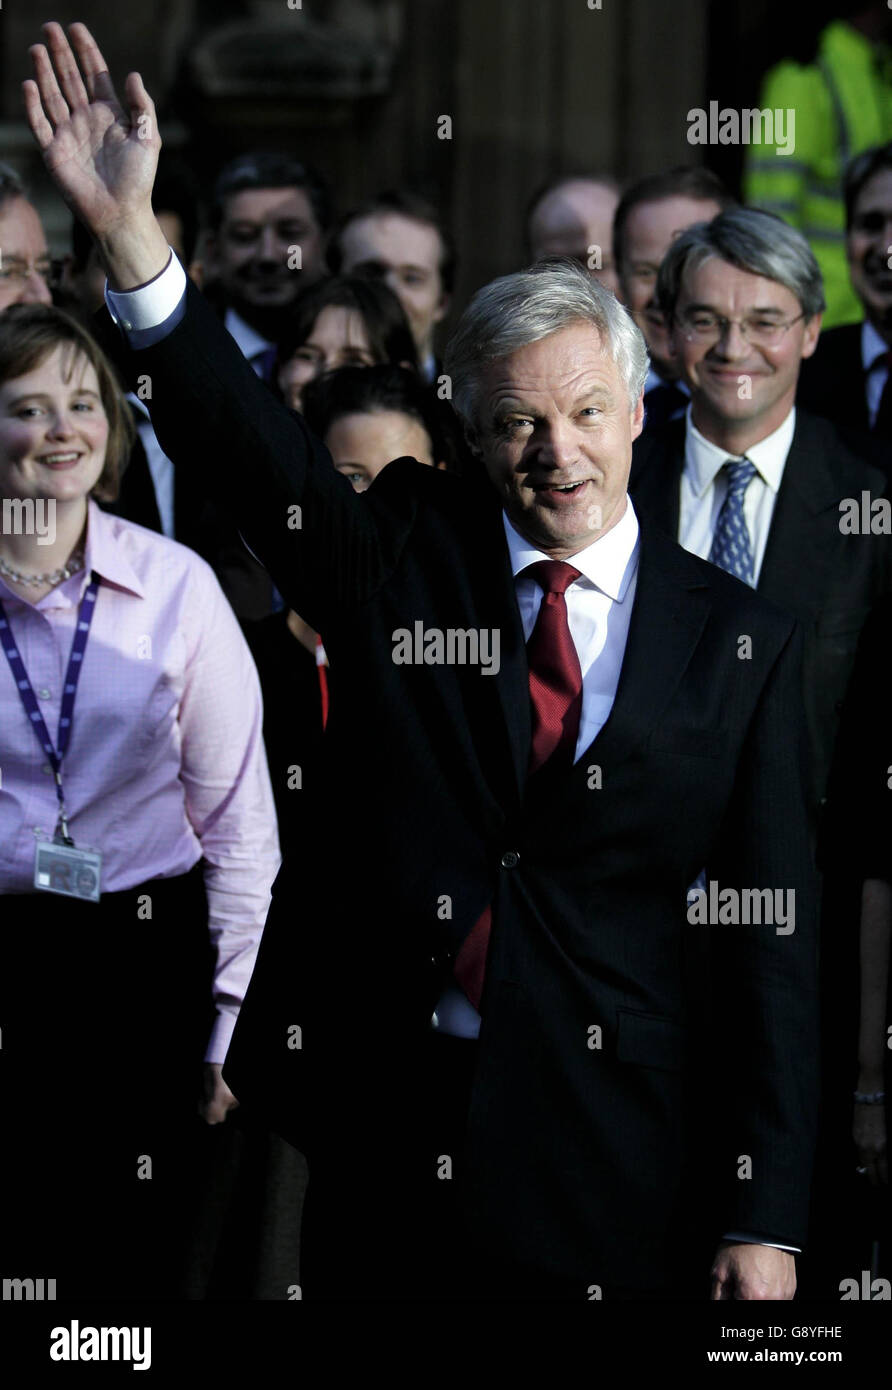 Conservative leadership candidate David Davis leaves the House of Commons in Westminster, central London, Thursday 20th October 2005 after the second round of voting in the leadership contest. David Cameron and David Davis will battle it out for the Tory leadership after Liam Fox was today eliminated in the final ballot of MPs. Mr Cameron, who topped the poll with 90 votes, and Mr Davis, who was second with 57, will now go forward into the final postal ballot of the entire 300,000-strong party membership. Dr Fox, who was third with 51 votes, drops out. See PA Story POLITICS Tories. PRESS Stock Photo